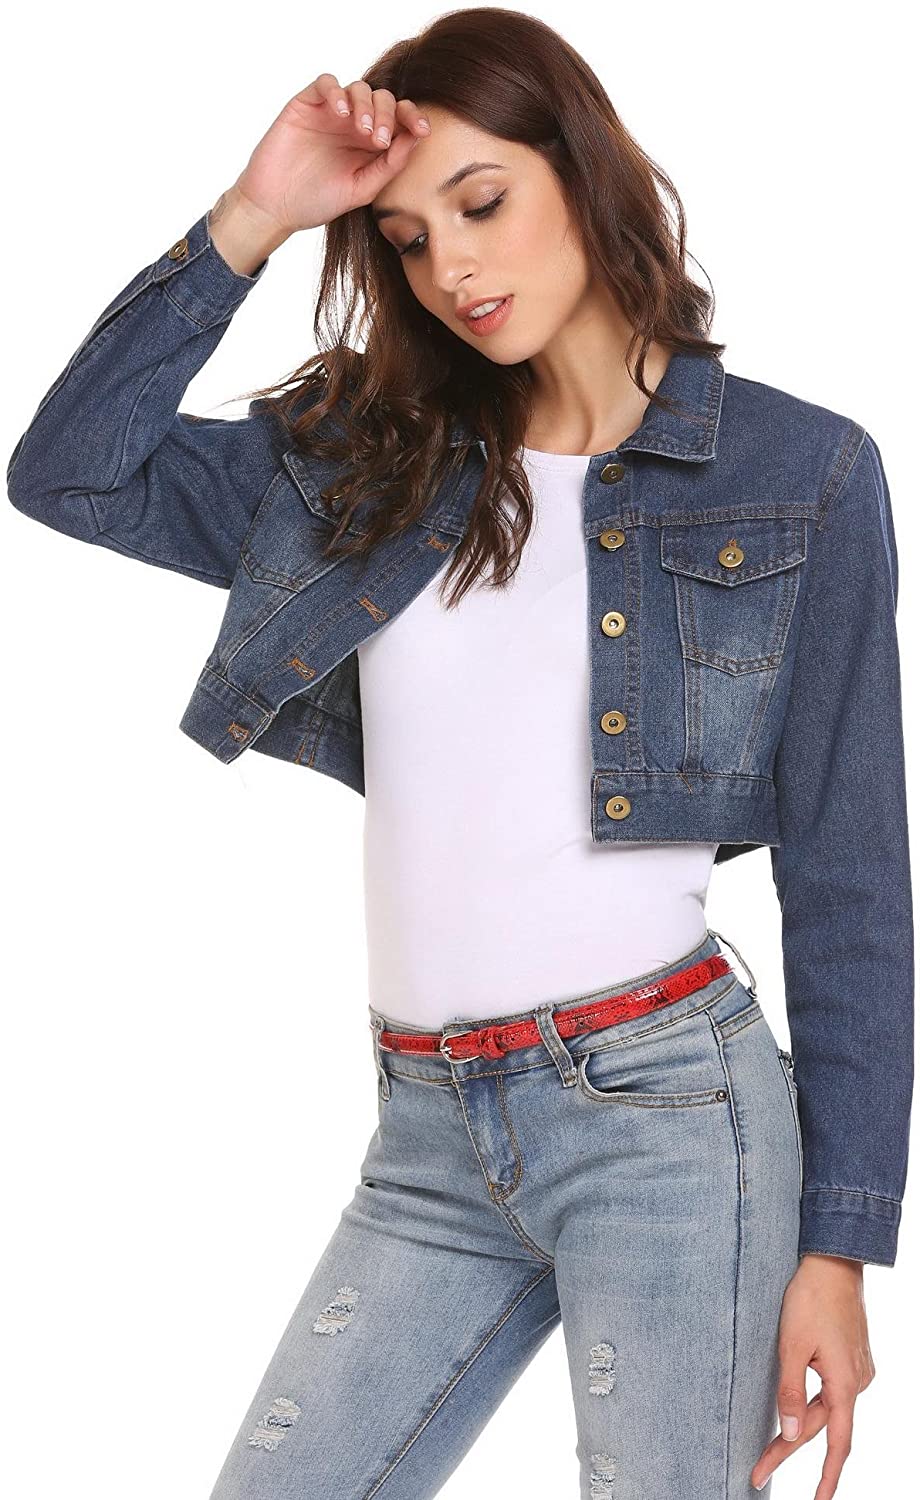 Grabsa Women's Button Down Long Sleeve Cropped Denim Jean Jacket with Pockets